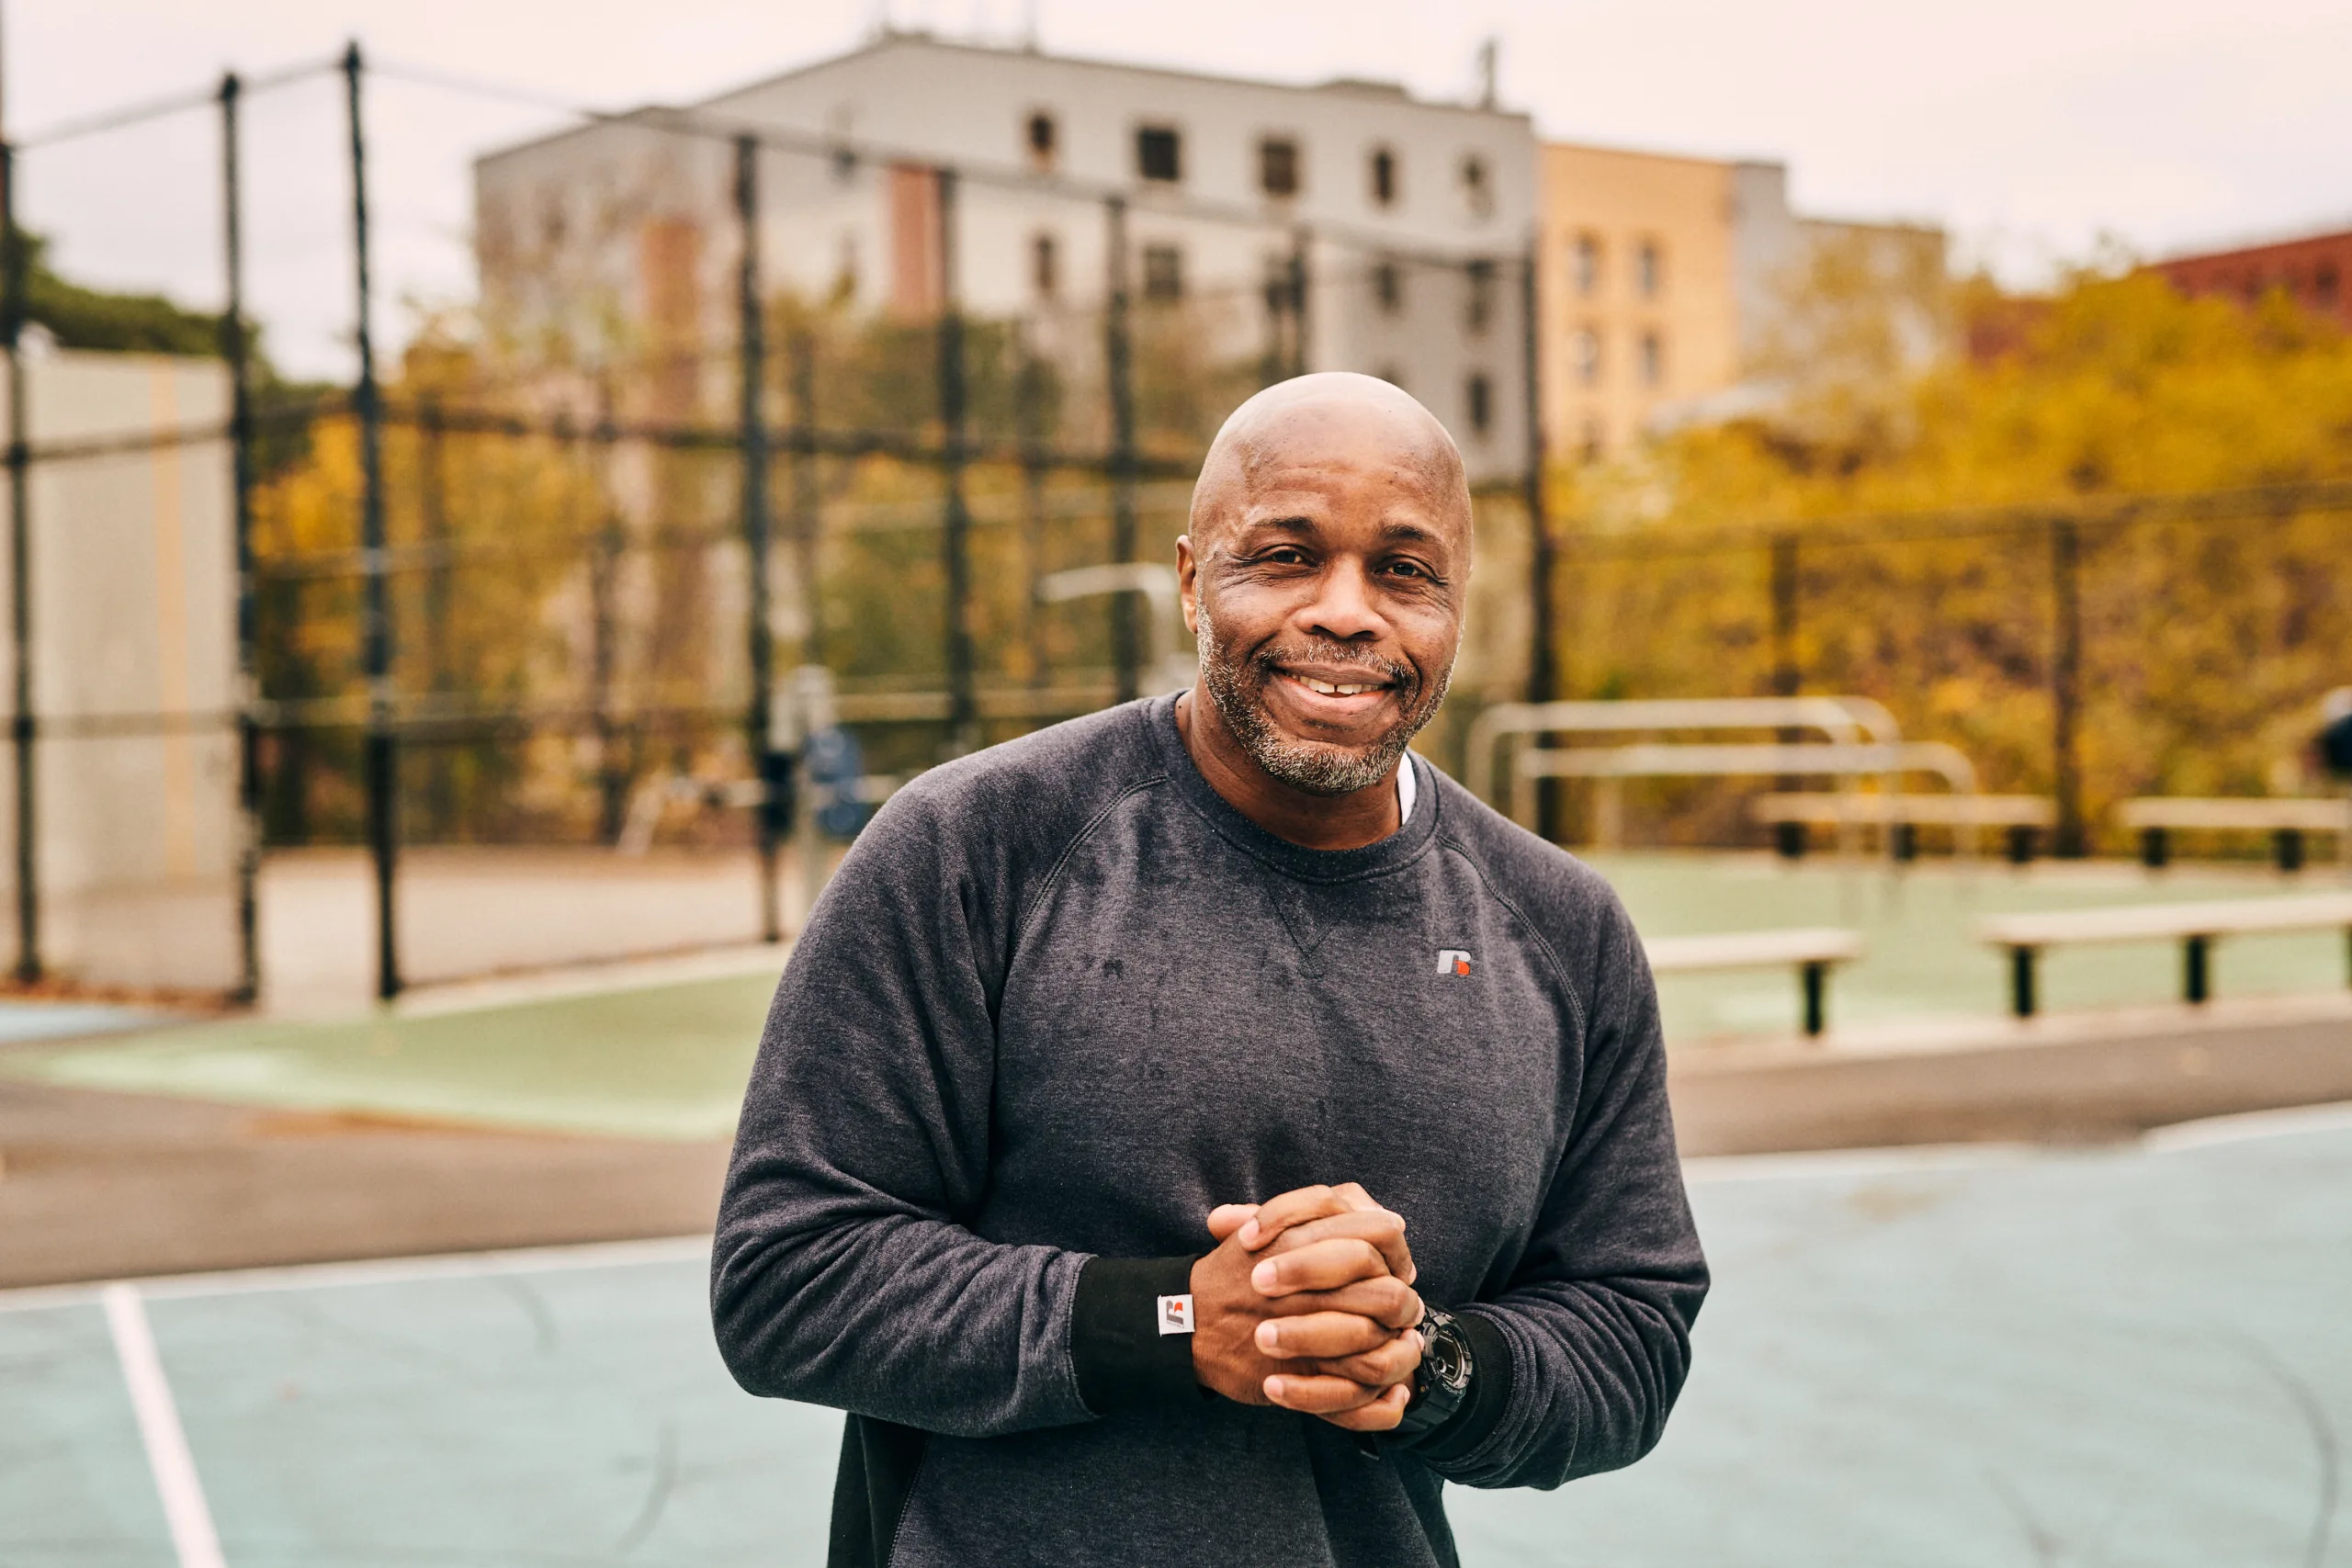 Basketball Was His Escape During His Wrongful Conviction. Now, Norberto Peets Is Free At Last.